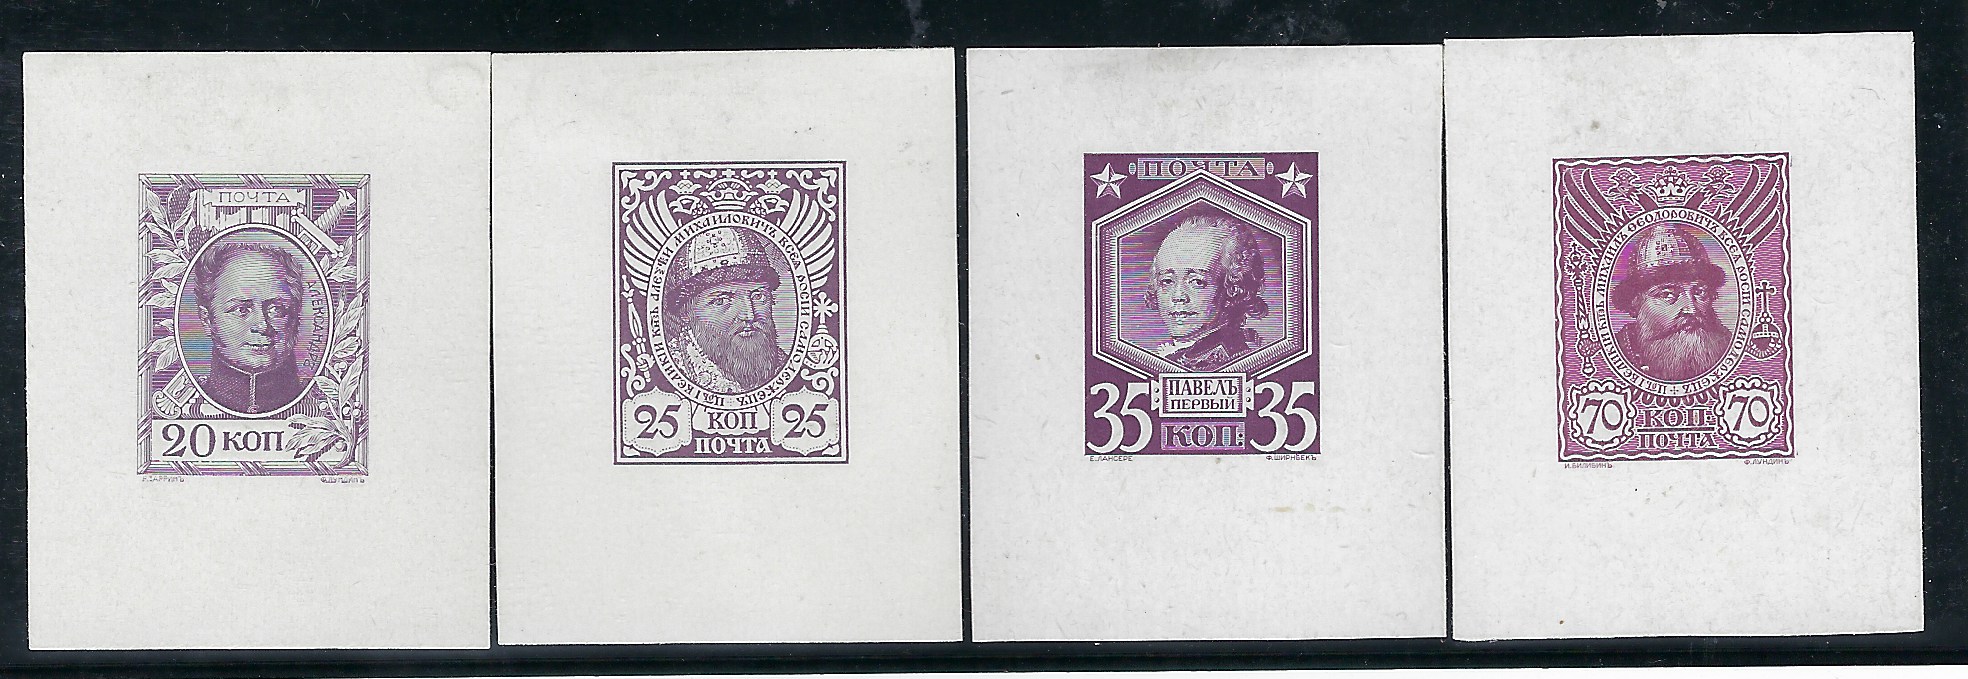 Russia 1913 Romanov Tercentenary group of eight proofs in purple shades on chalk surfaced paper, with the name of designer and engraver beneath the image, including 1k, 2k, 14k, 15k, 20k, 25k, 35k and 70k values, odd insignificant thin, the majority described at the Tsar Nicholas collection sold at Robson Lowe in 1935, published in Yamchik-Postal Rider 1983, No 12, pages 12 to 15; a rare assembly.